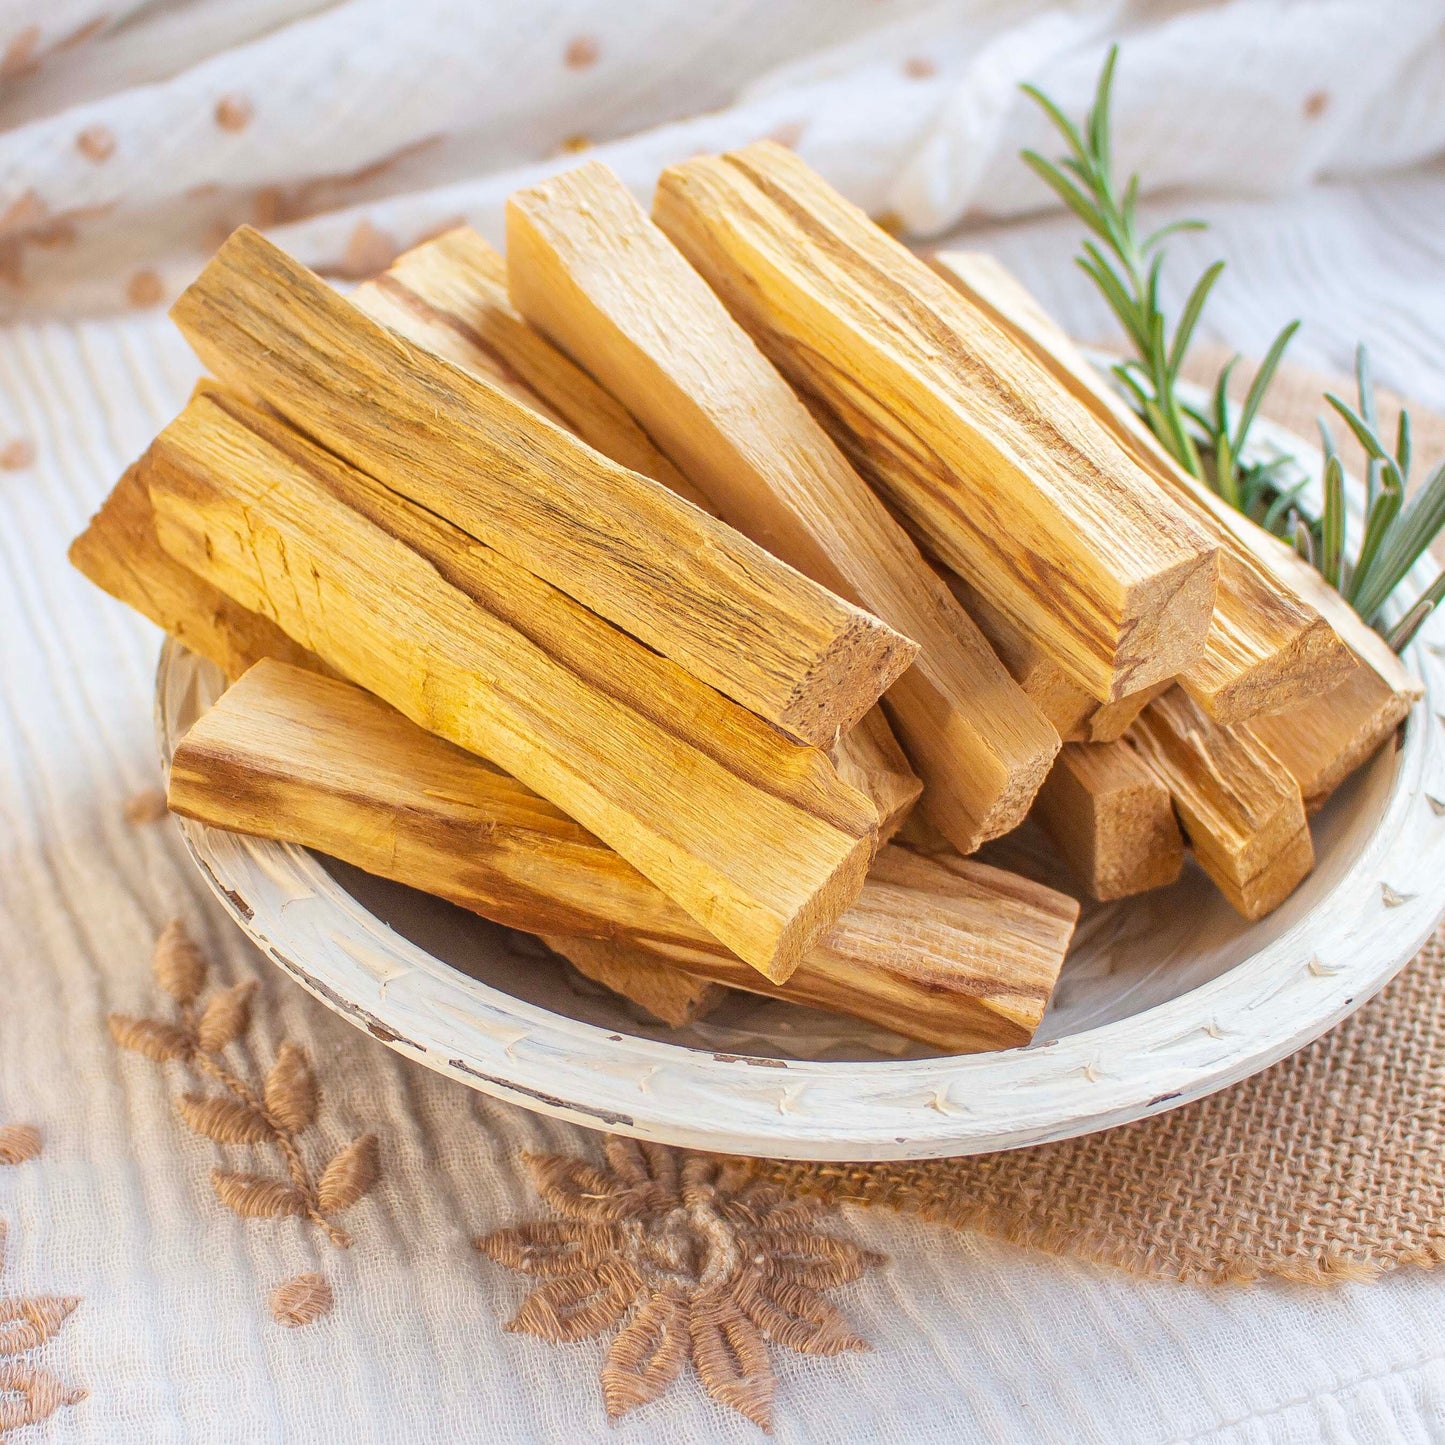 Sustainable Palo Santo Wood | Ethically Sourced | Holy Sacred Wood Natural Incense | 1 or 3 sticks